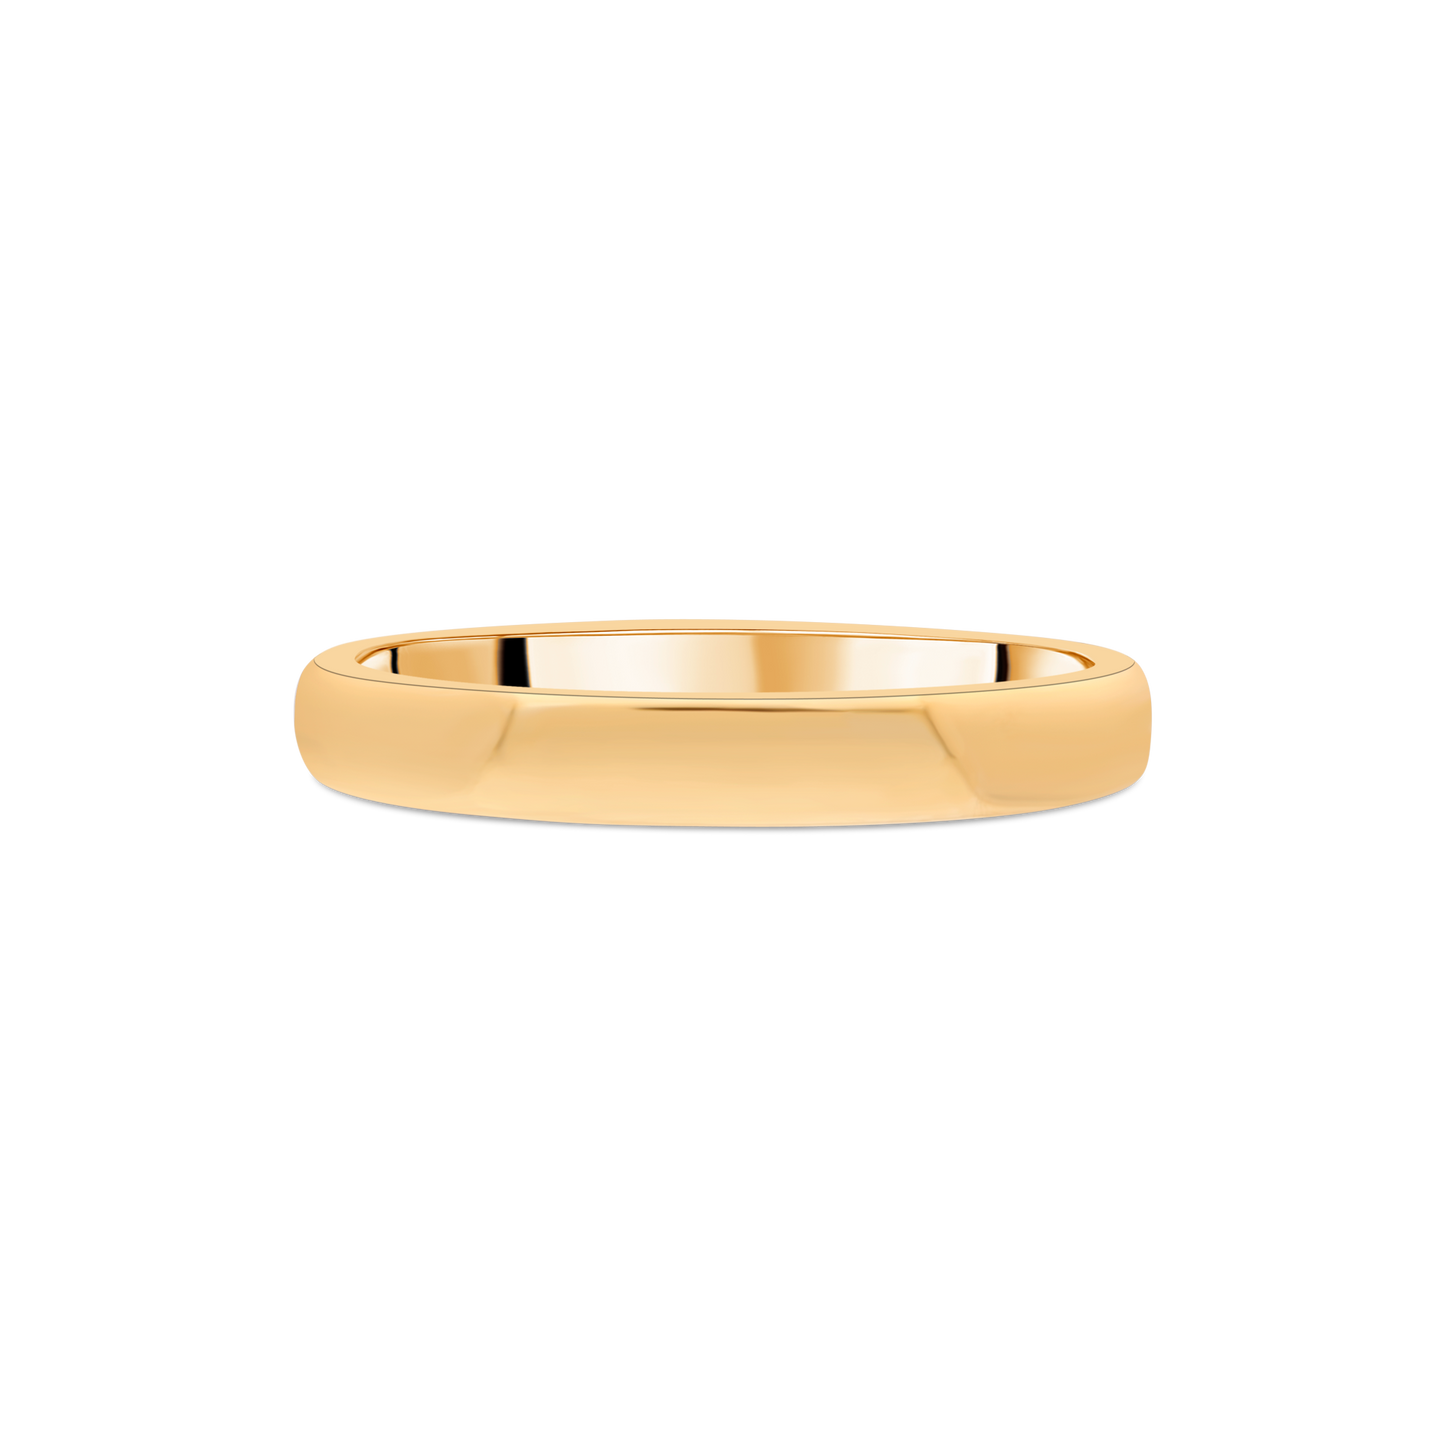 "Blush" Rose Gold 3mm Heavy-Weight Comfort Fit Ladies Wedding Band